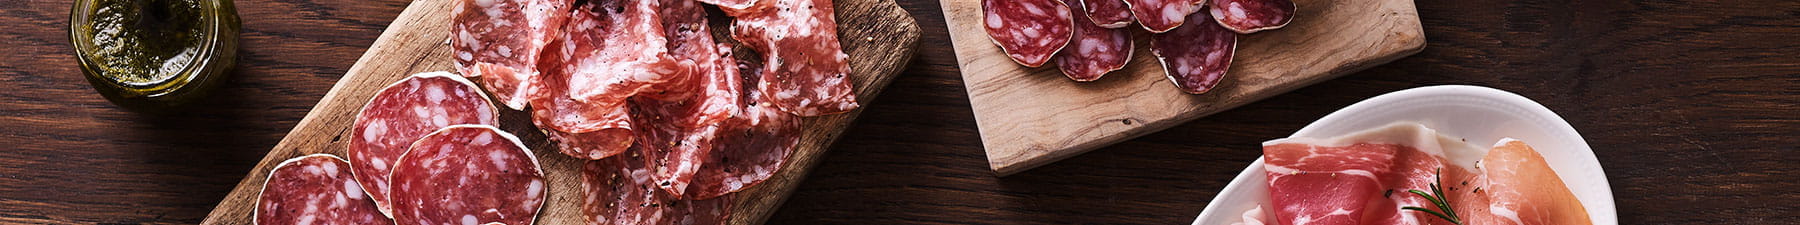 Meat charcuterie